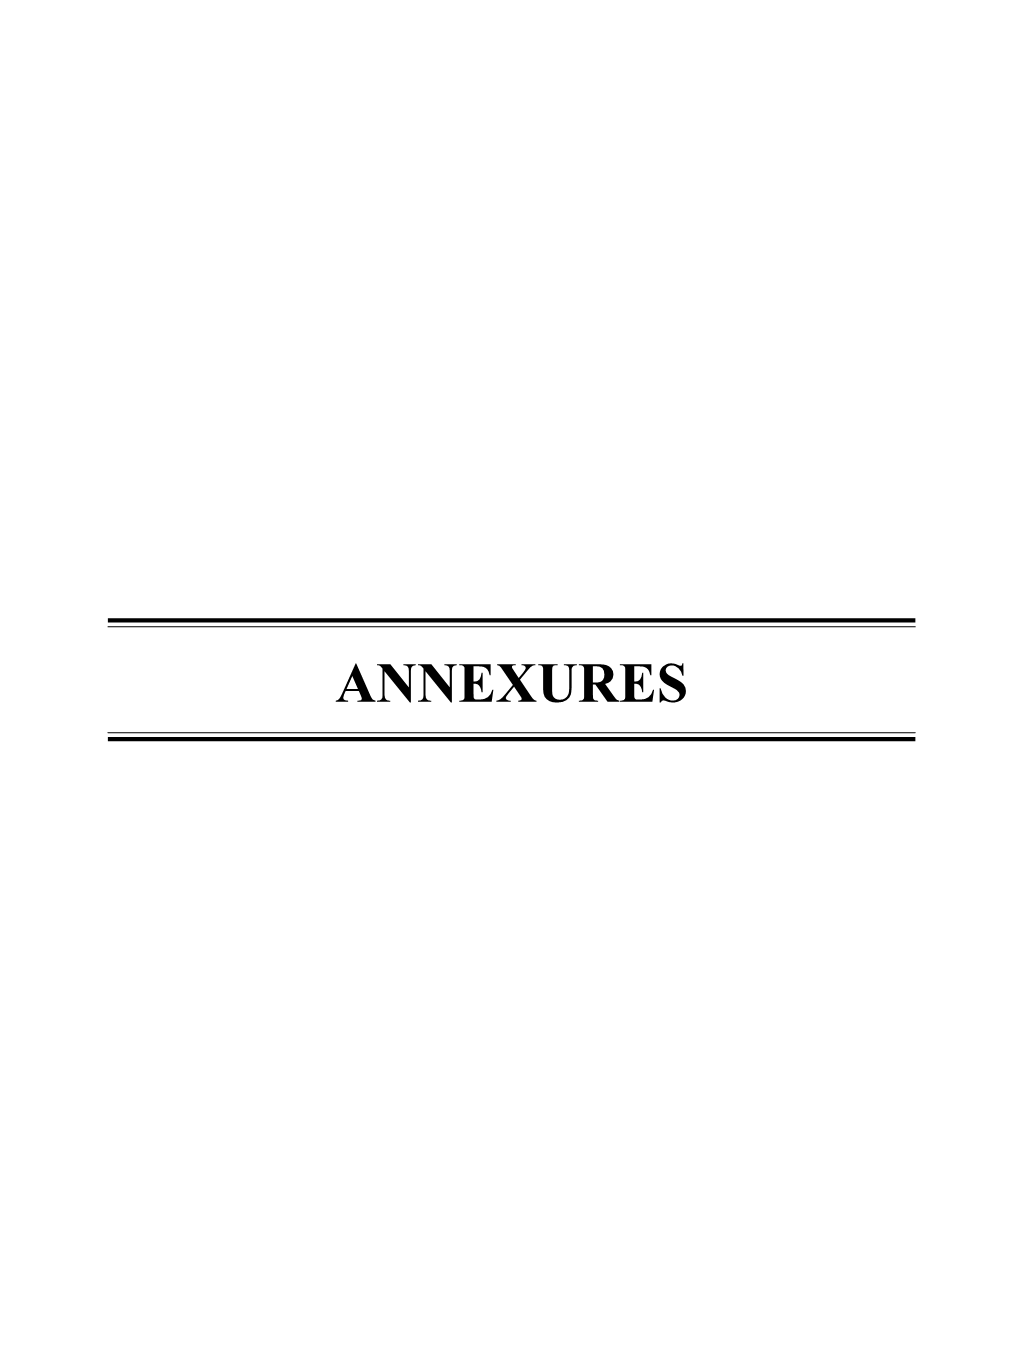 ANNEXURES 270 Twelfth Finance Commission Chapter 1: Annexure 271